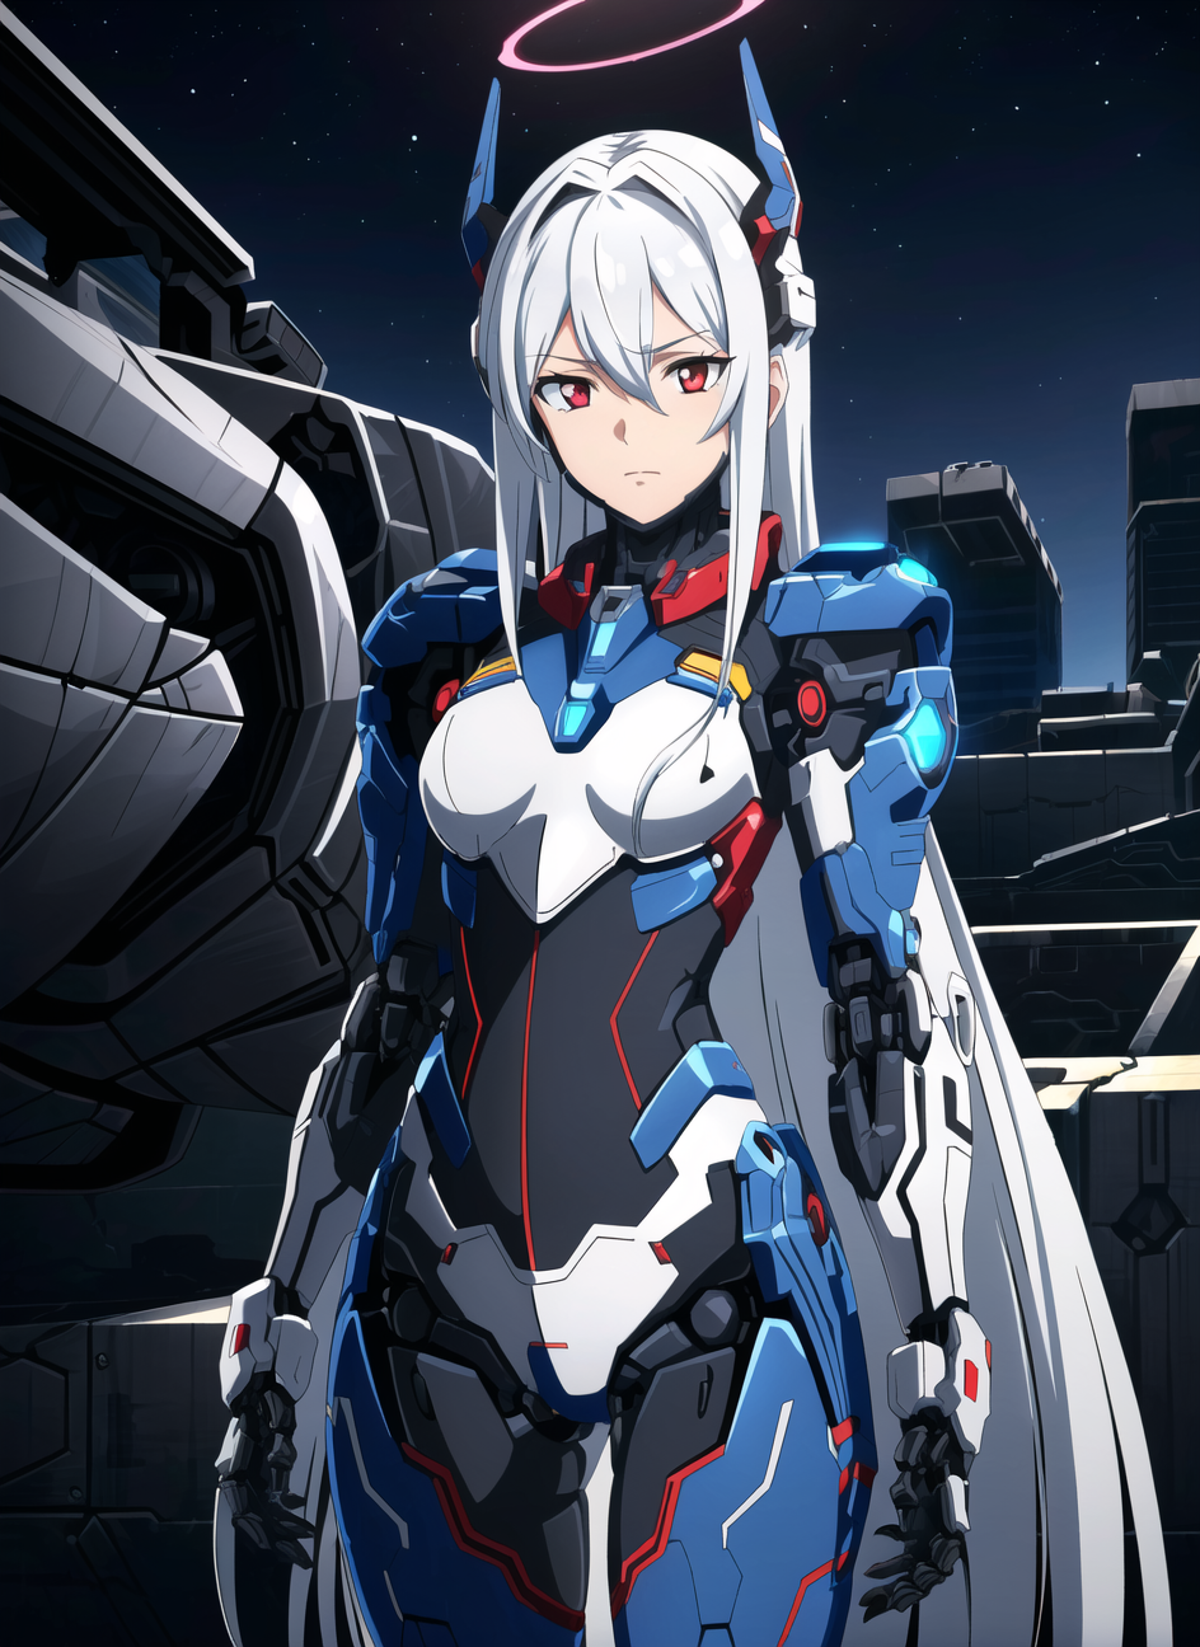 The image features a woman with long white hair wearing a blue and black armored suit. She is standing in front of a large robot or a metal structure, possibly an armored warrior. The scene appears to be set in a futuristic or sci-fi environment. The woman's attire and surroundings give off an impression of a powerful and technologically advanced character.